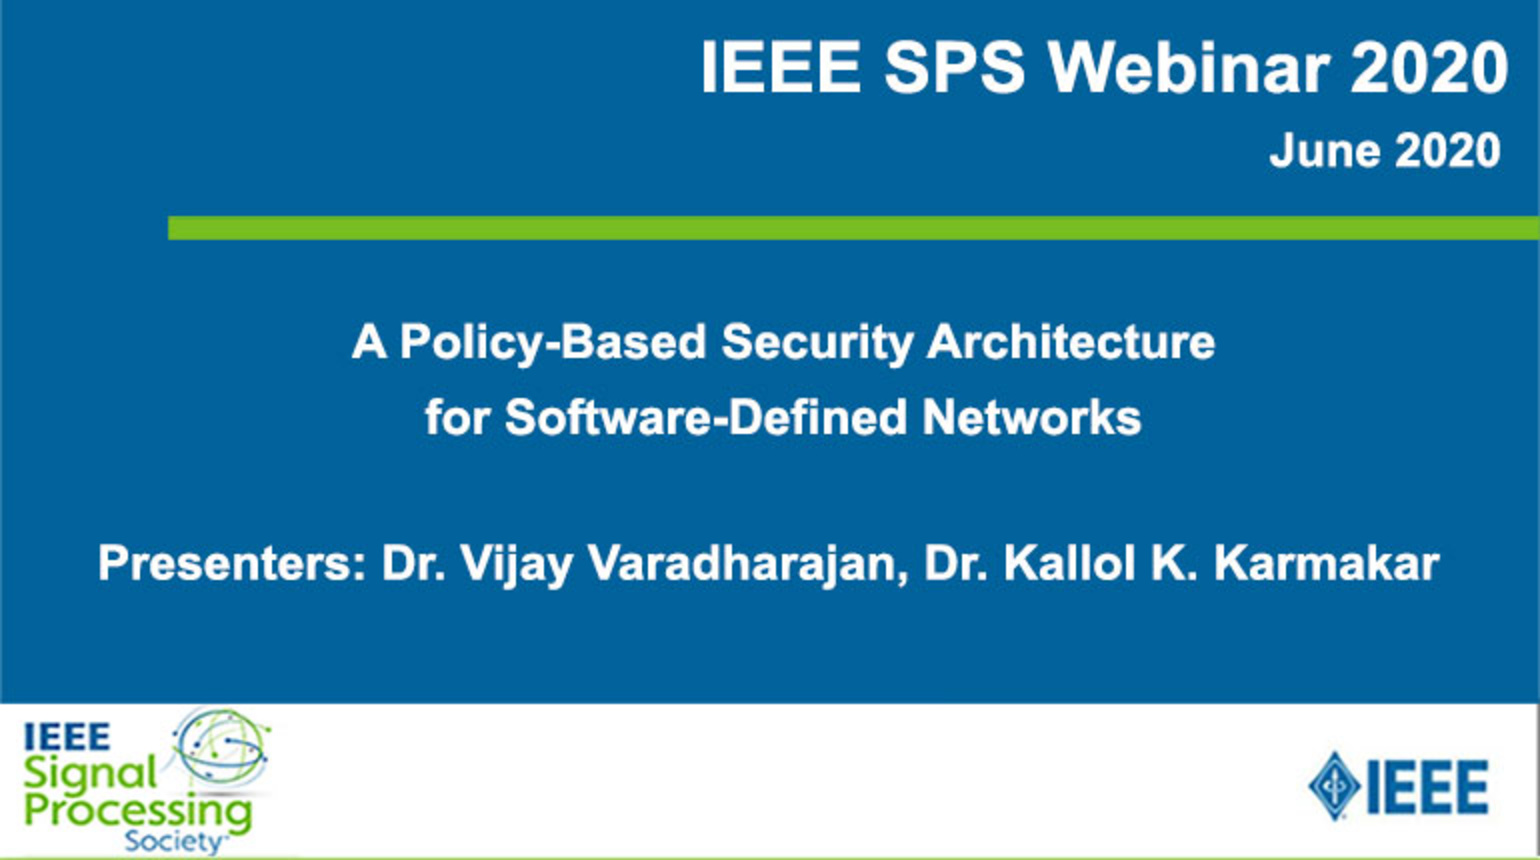 A Policy-Based Security Architecture for Software-Defined Networks